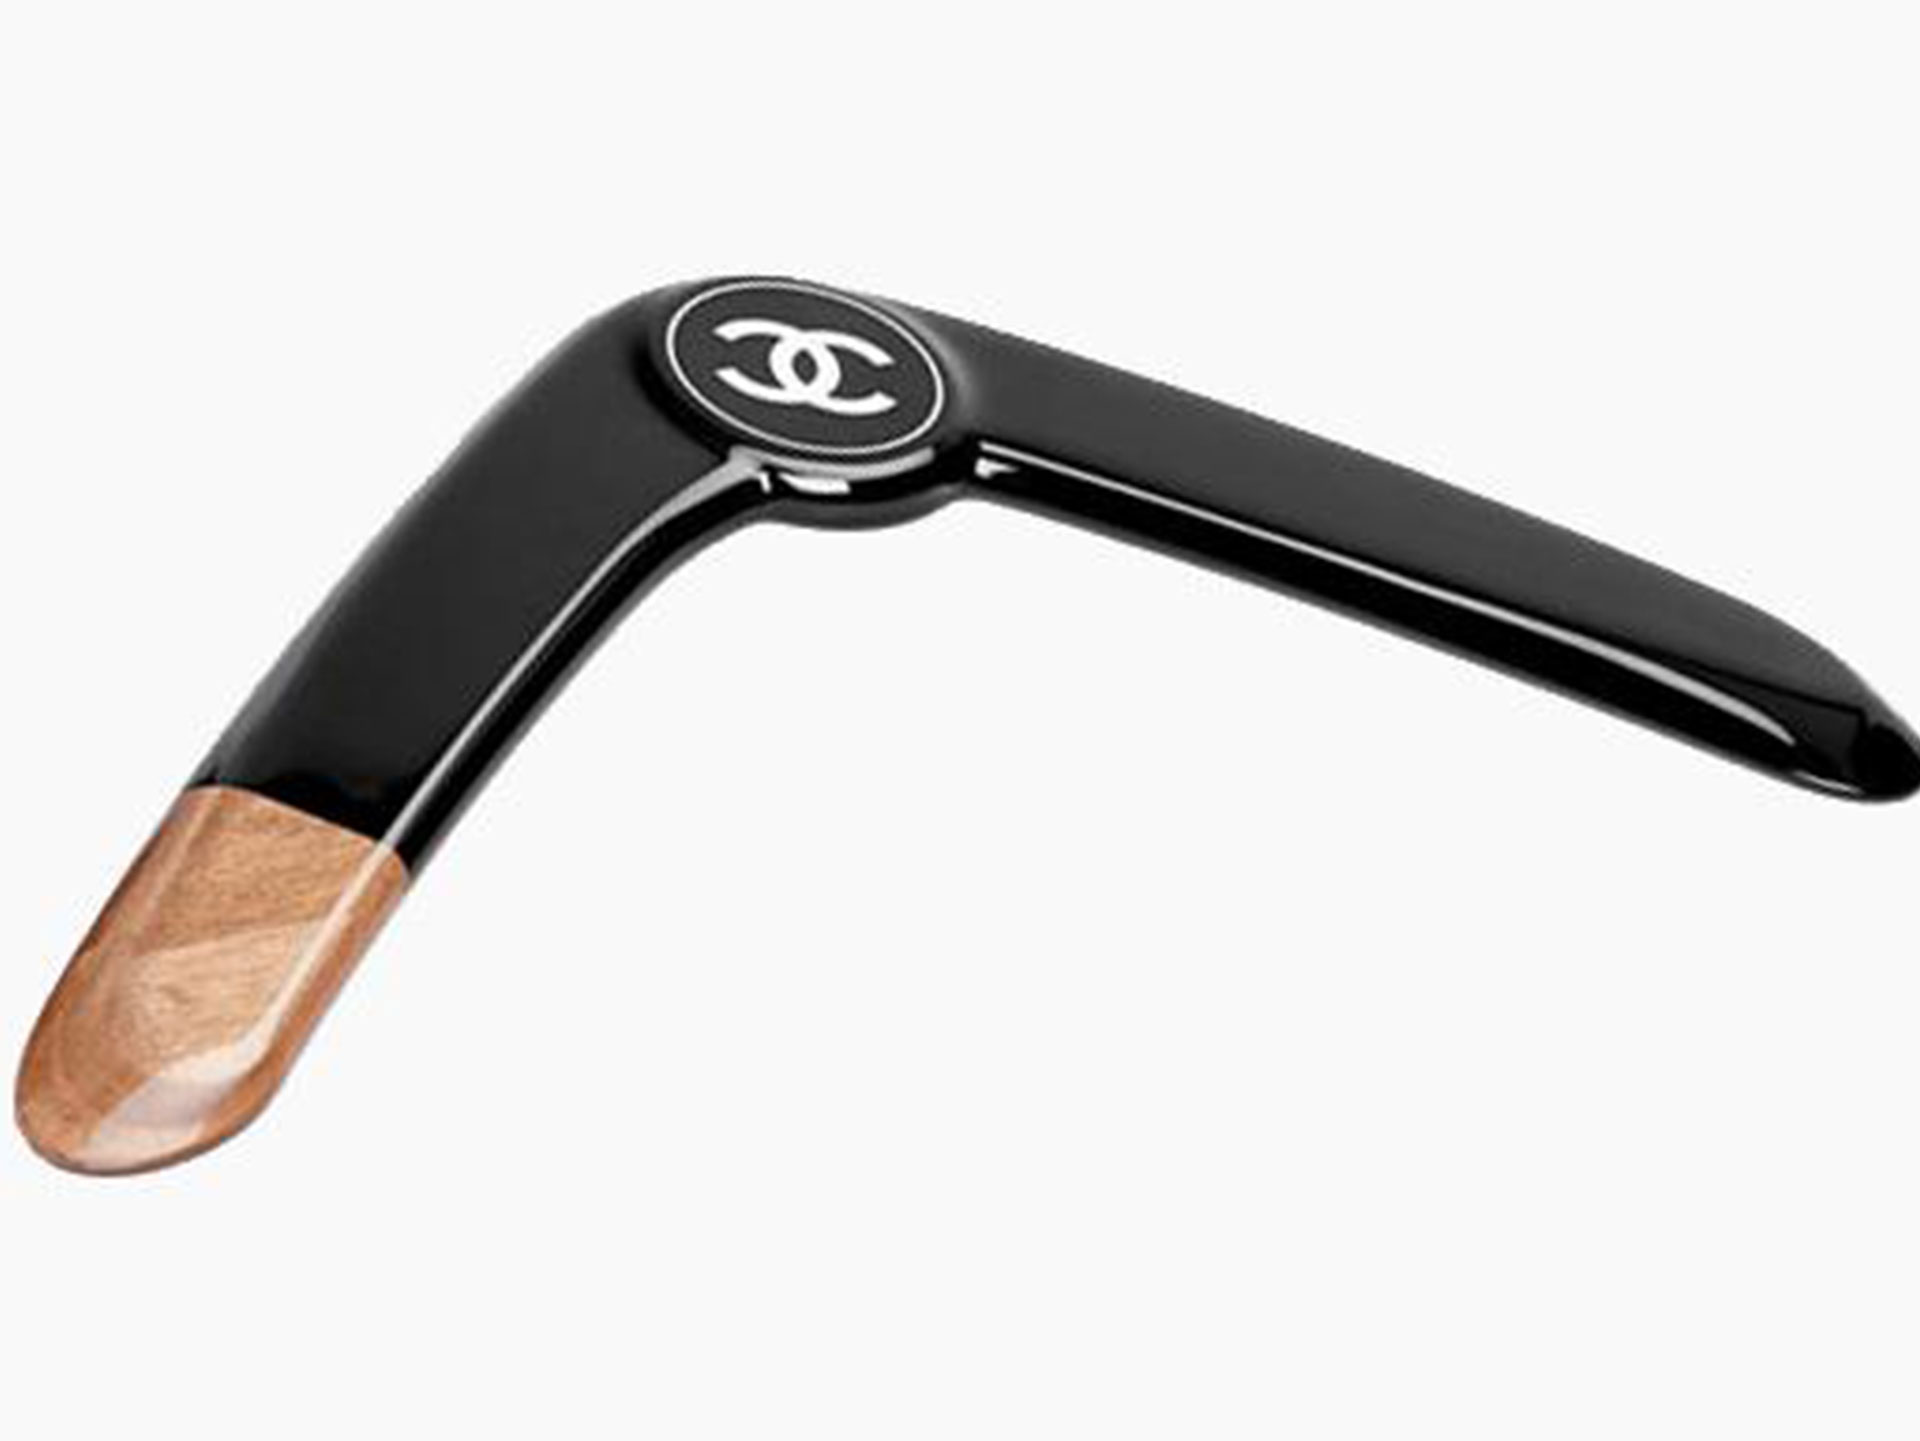 Chanel’s $2,000 boomerang is offending people for more than just its price